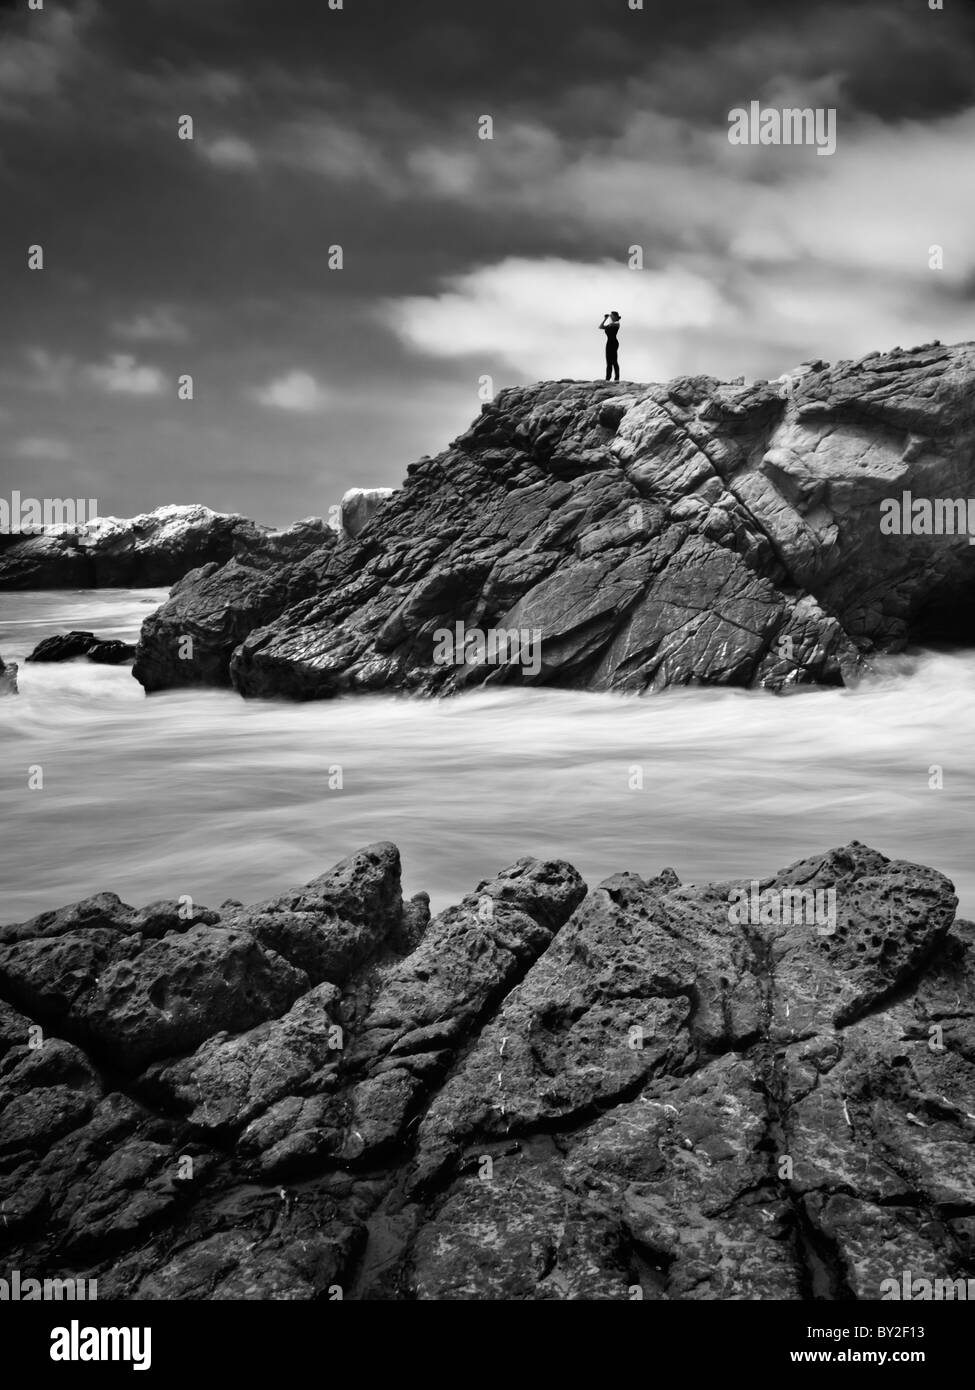 Woman standing on rocks with binoculars, looking out over the ocean. Malibu Beach, California. Stock Photo